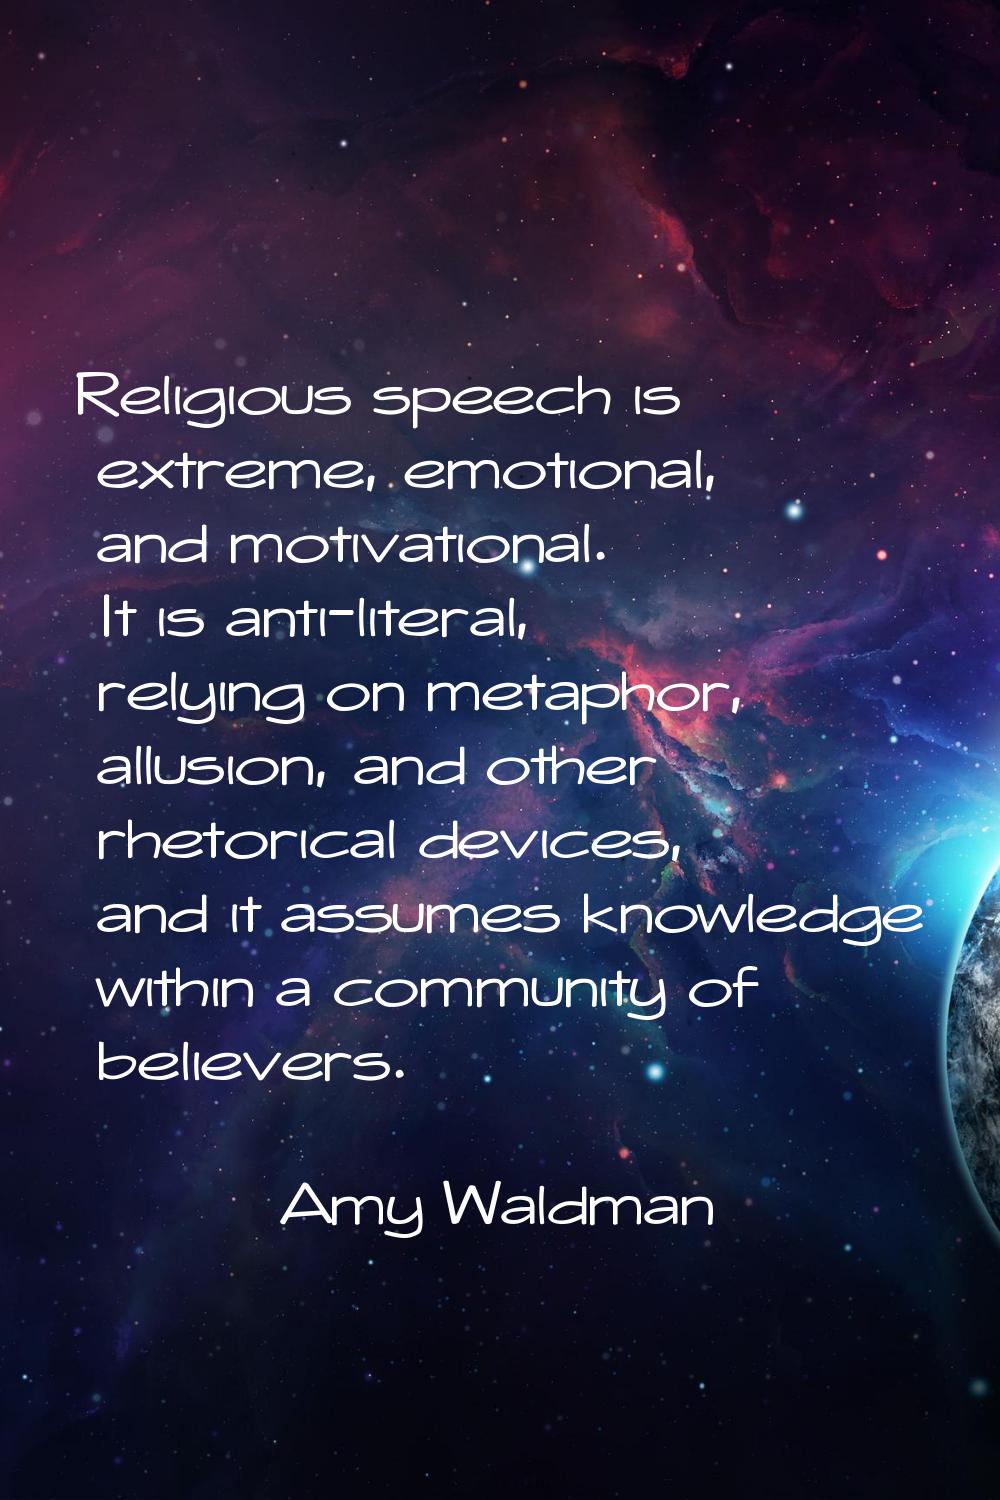 Religious speech is extreme, emotional, and motivational. It is anti-literal, relying on metaphor, 